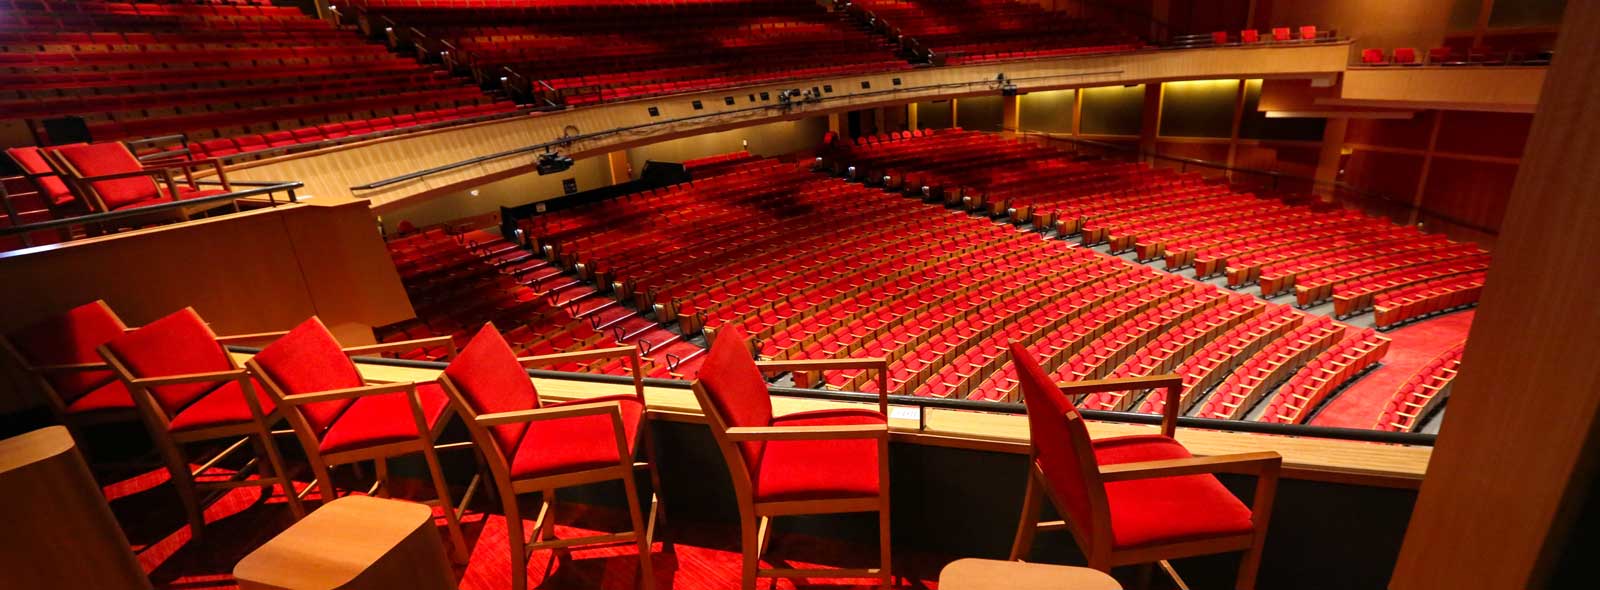 Dpac Seating Chart View